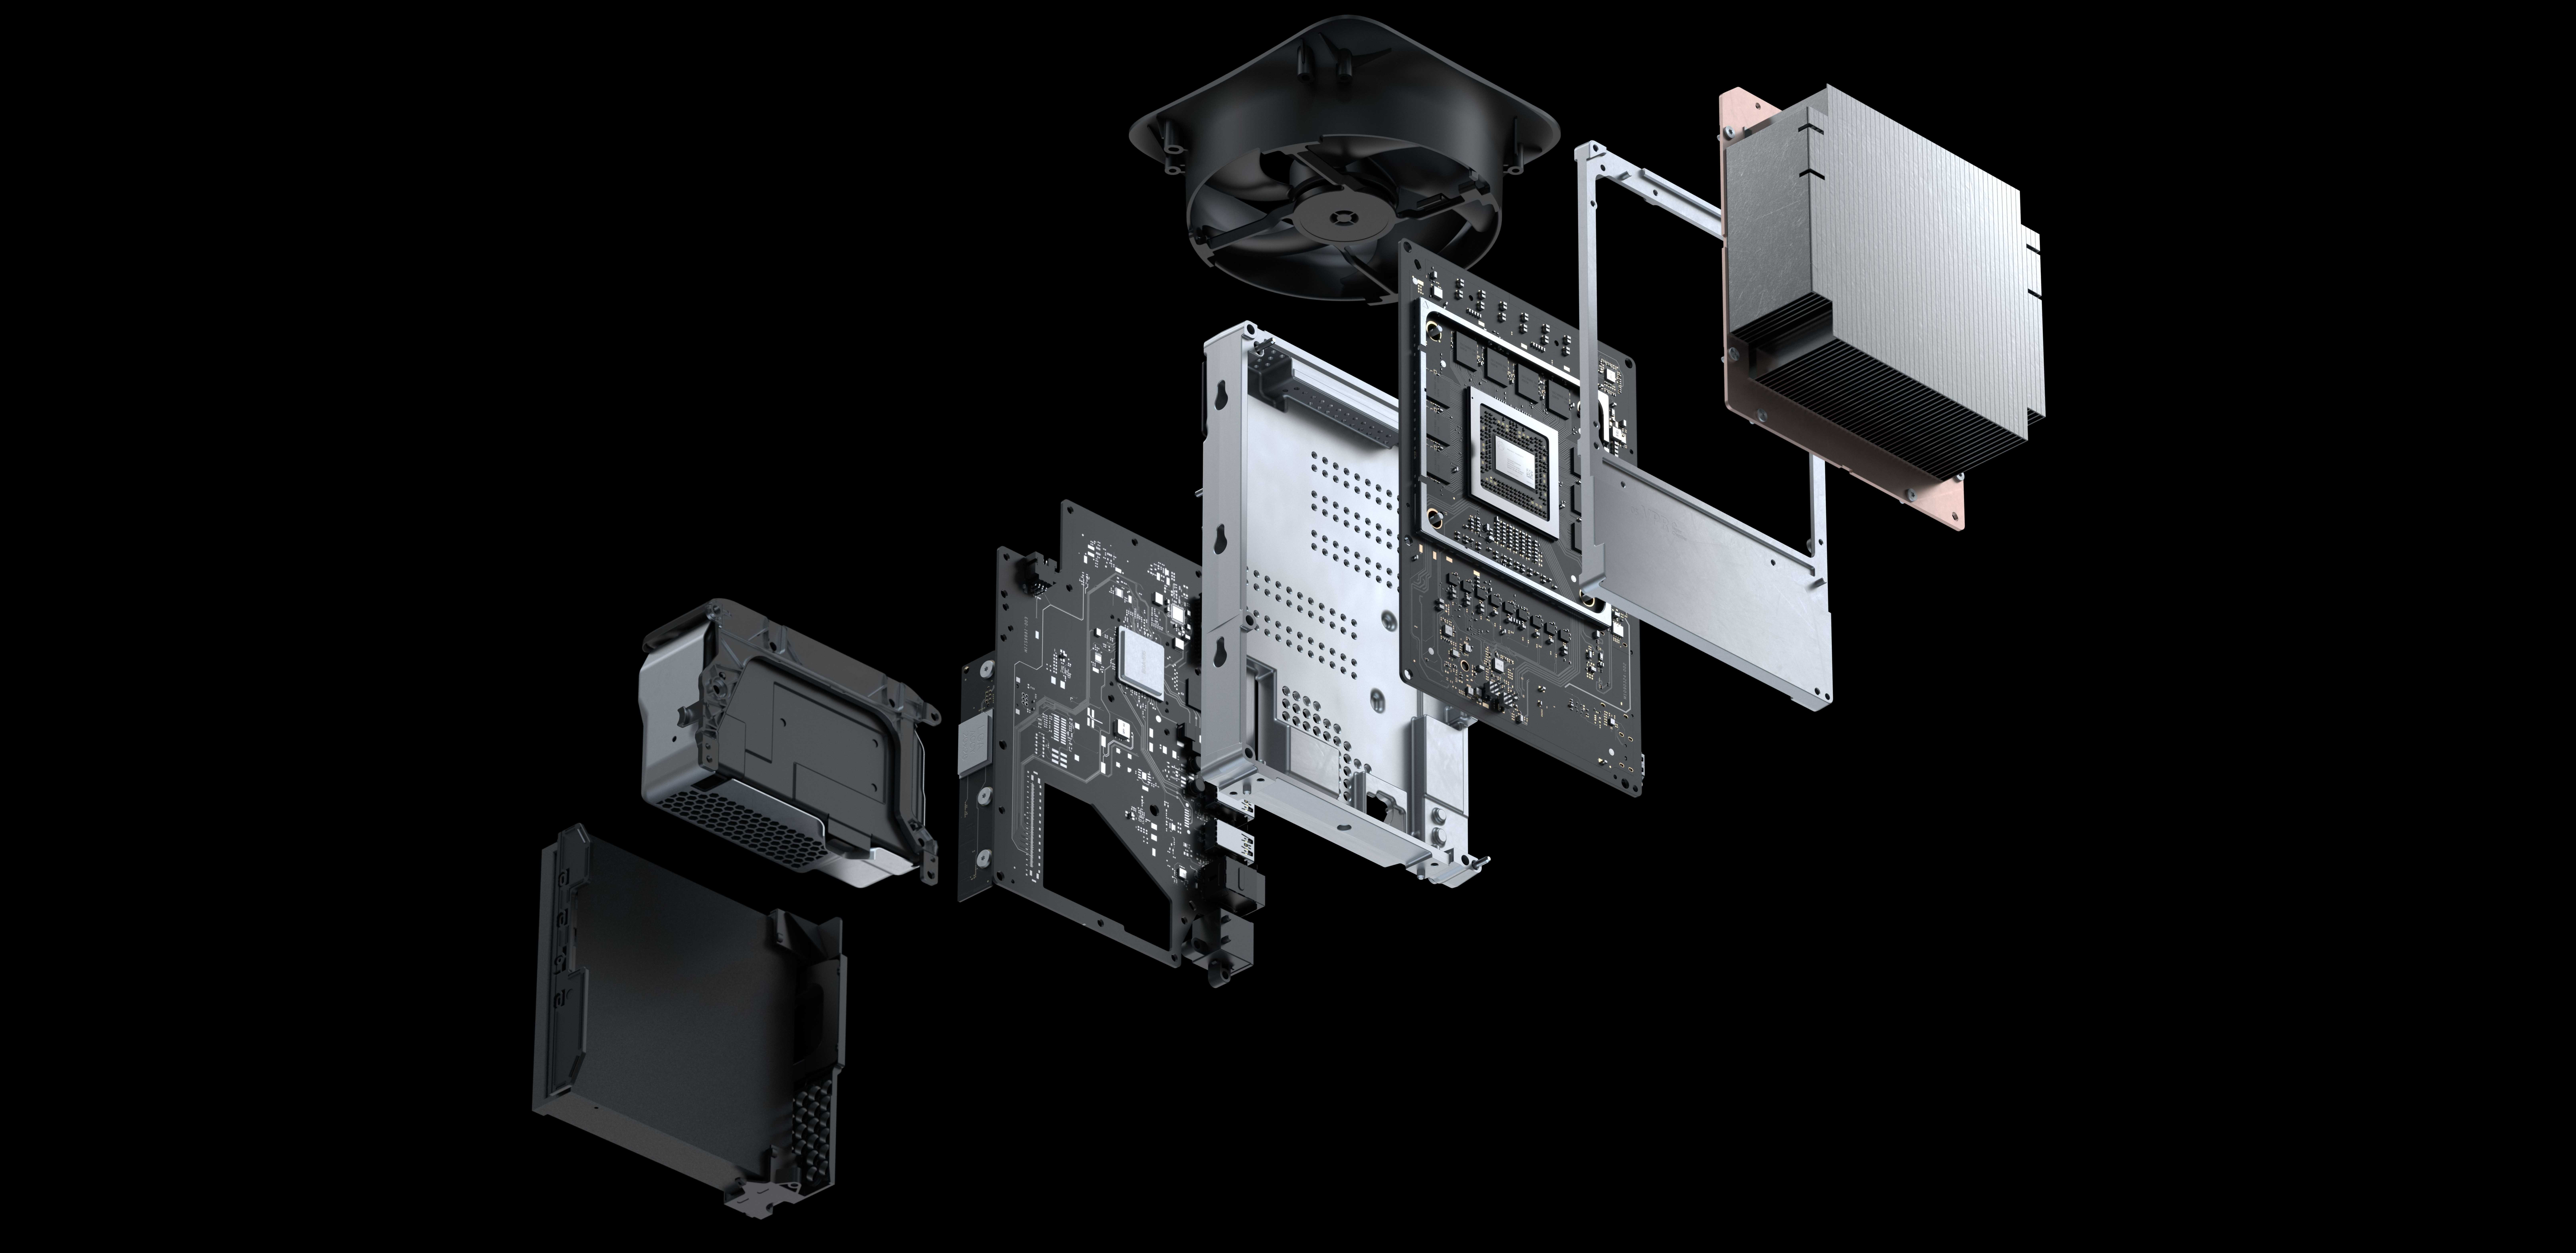 Xbox Series X exploded view